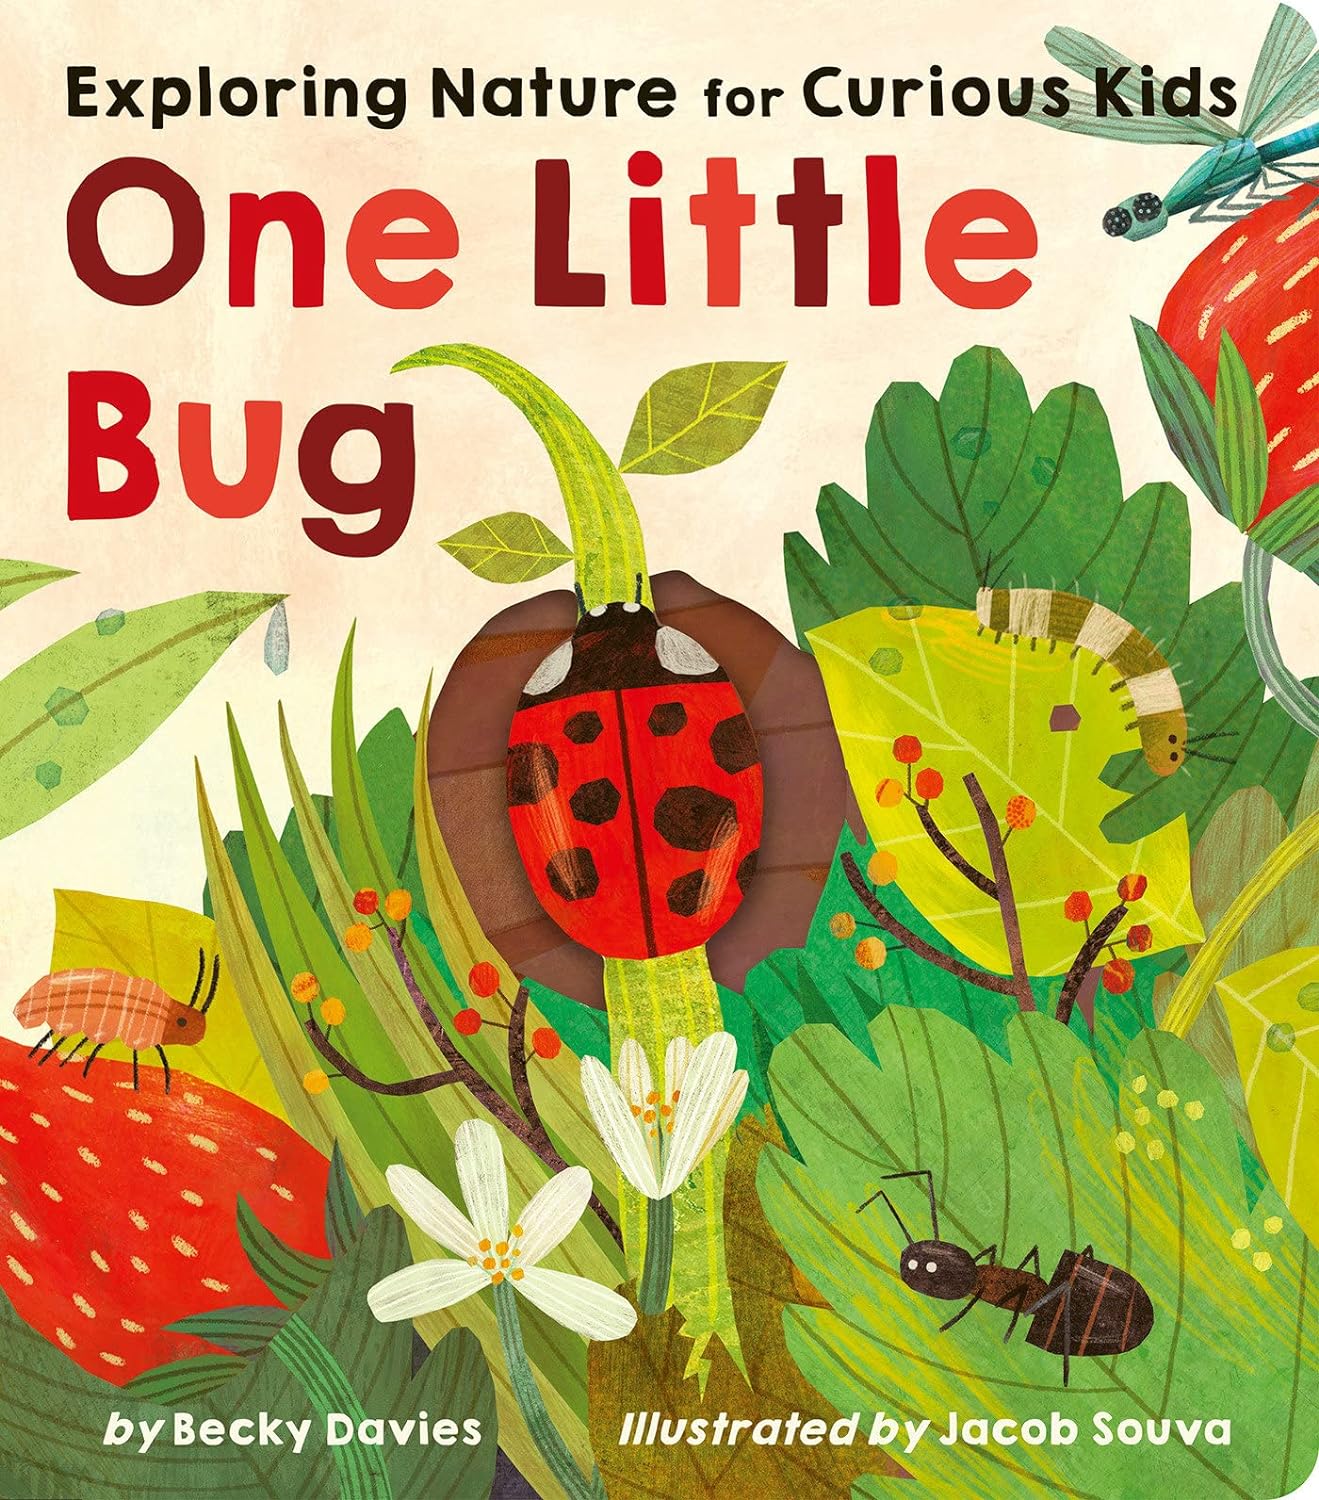 Book　Nature　Kids　Board　Doha　One　–　Lift　for　book　Bag　Little　Exploring　Bug:　Curious　th　–